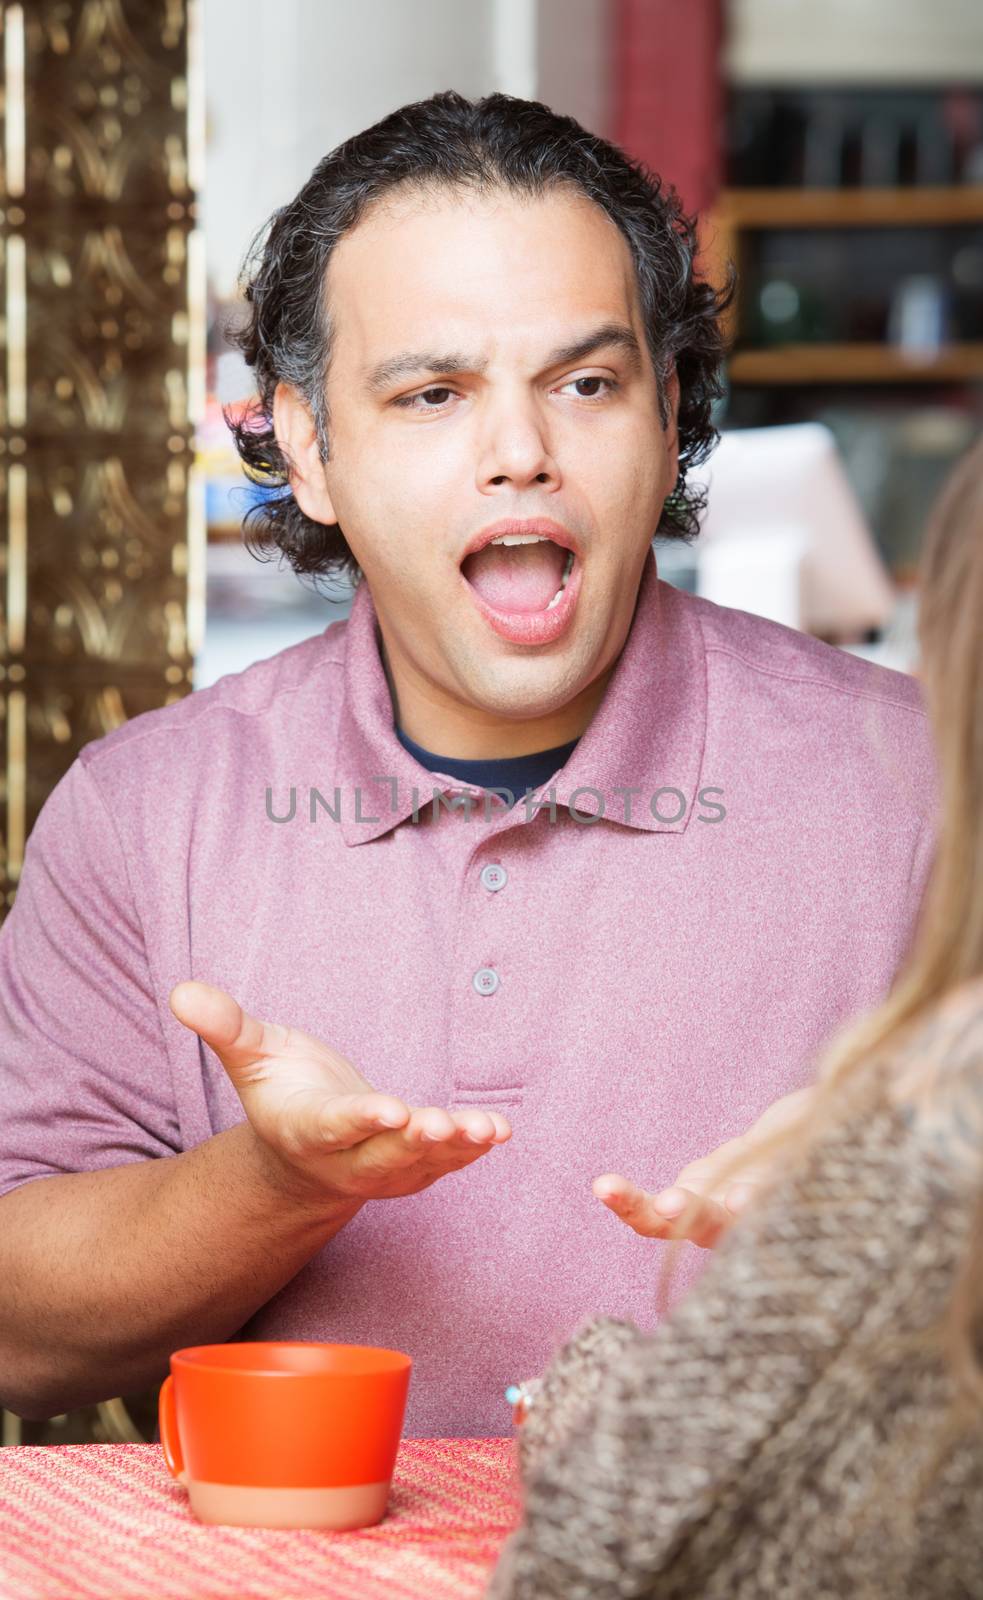 Frustrated man with woman at coffee house indoors